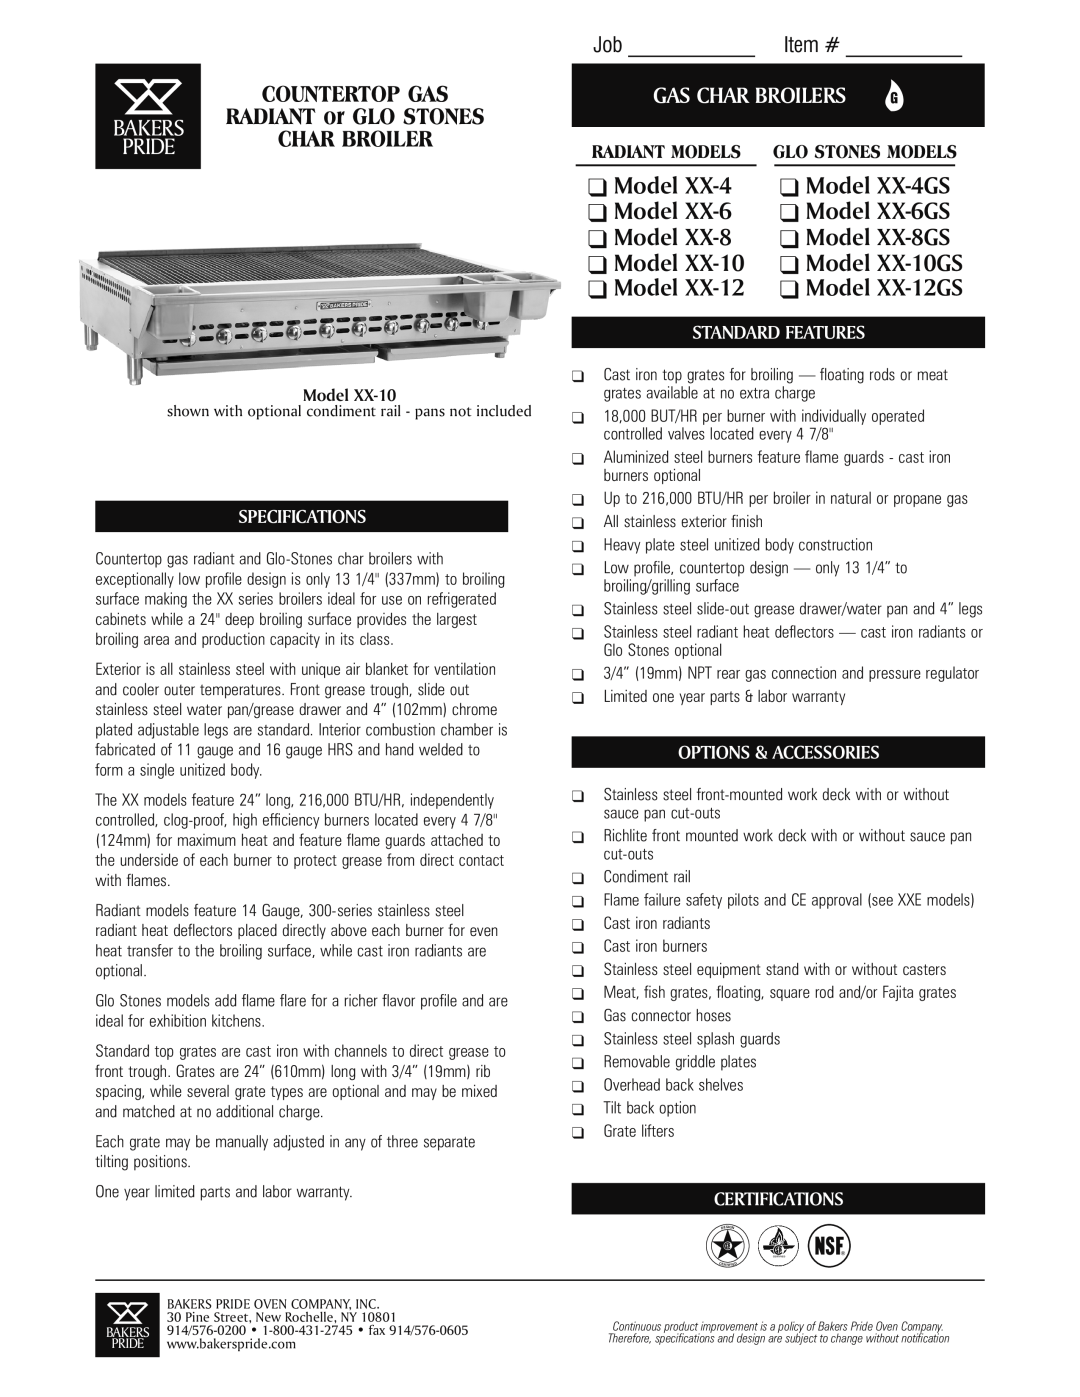 Bakers Pride Oven XX-10 specifications Job Item #, RADIANT or GLO STONES, Char Broiler, Model XX-8 Model XX-8GS, Bakers 